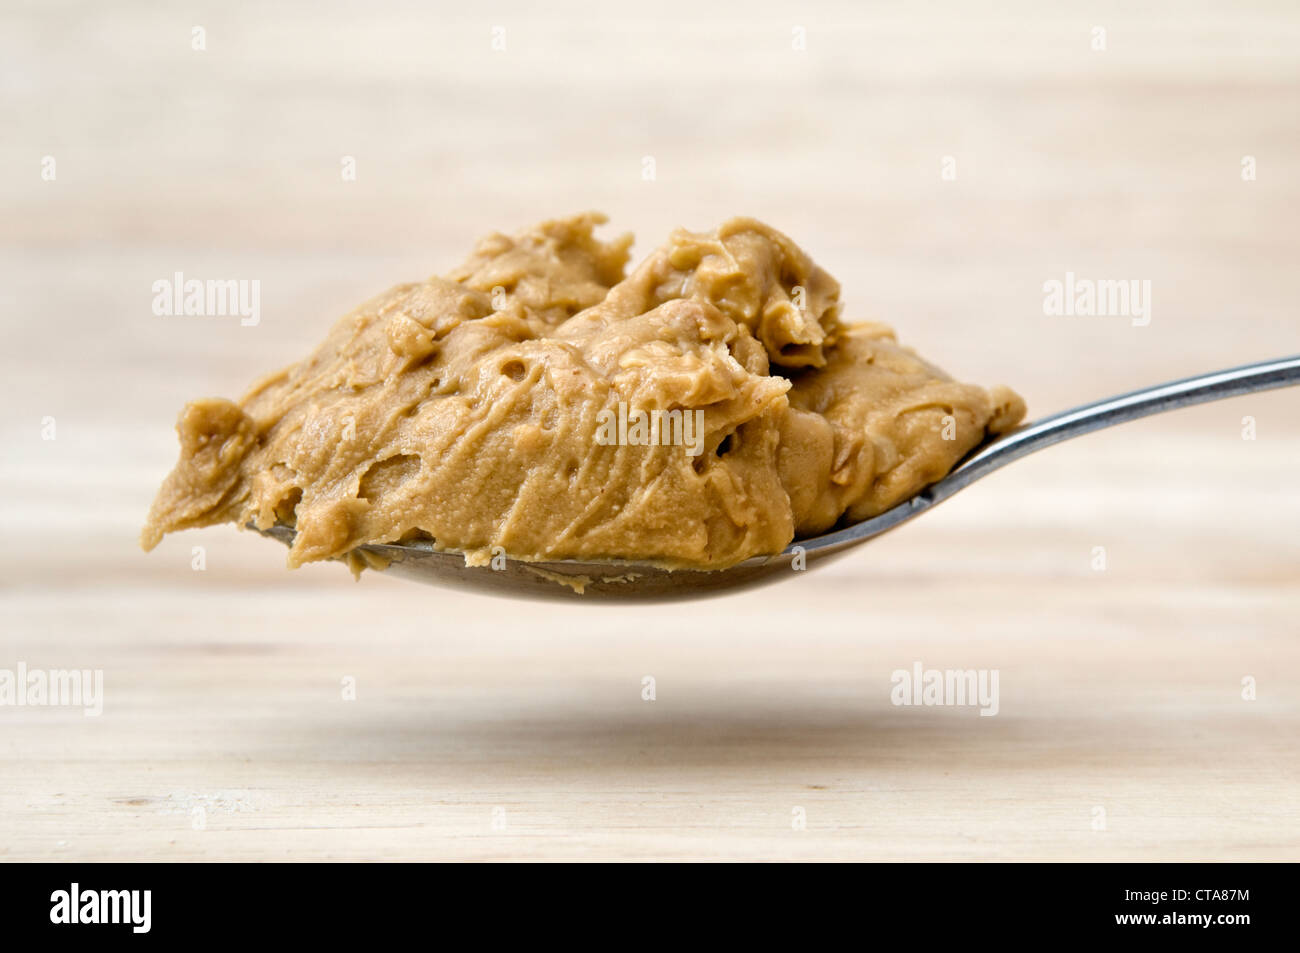 https://c8.alamy.com/comp/CTA87M/heaped-spoon-of-peanut-butter-held-over-a-wooden-chopping-board-CTA87M.jpg